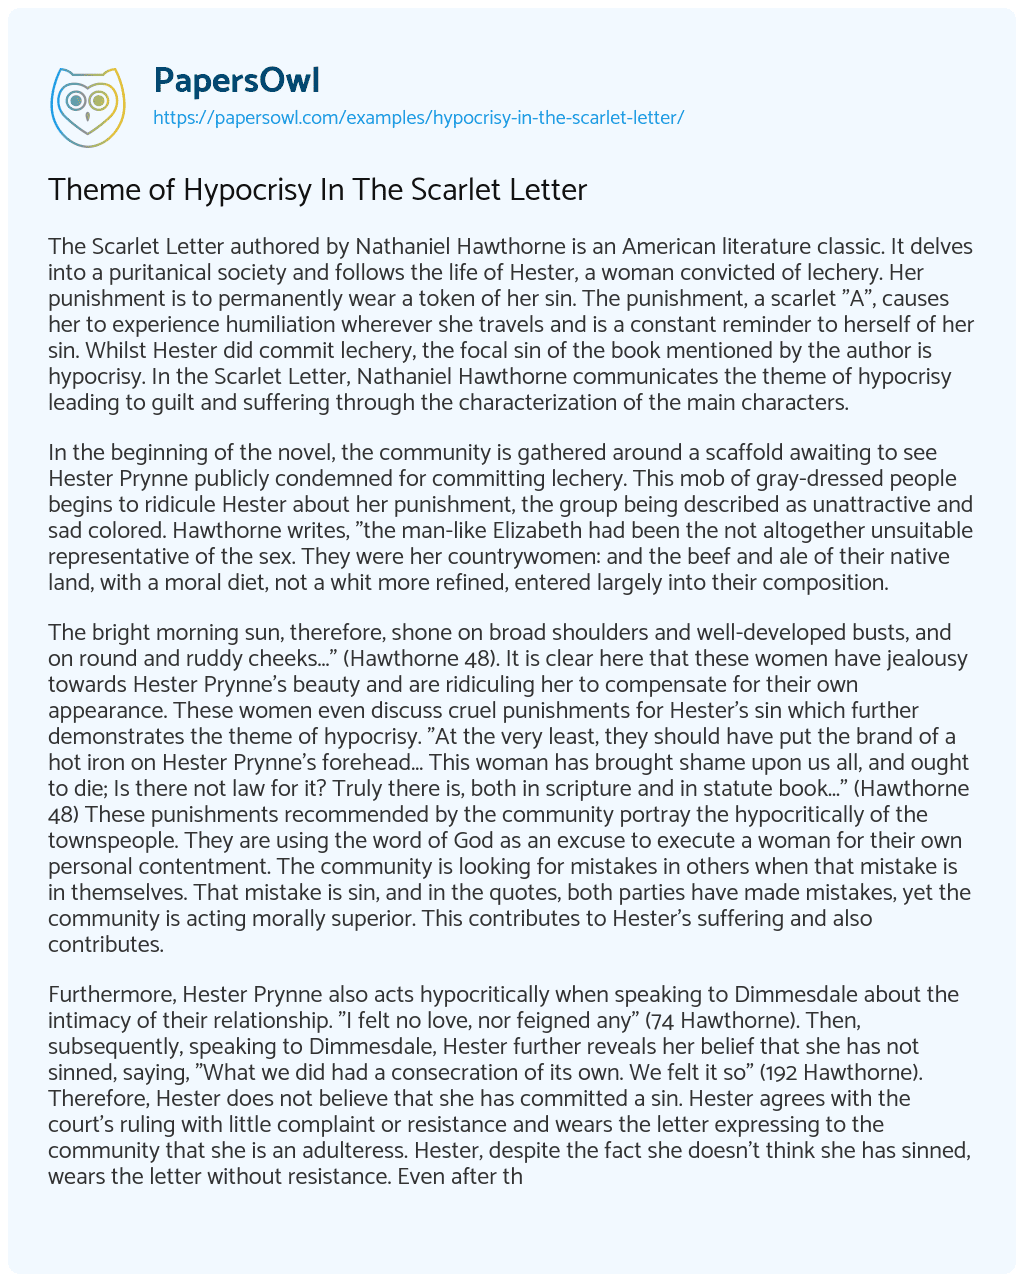 Essay on Theme of Hypocrisy in the Scarlet Letter